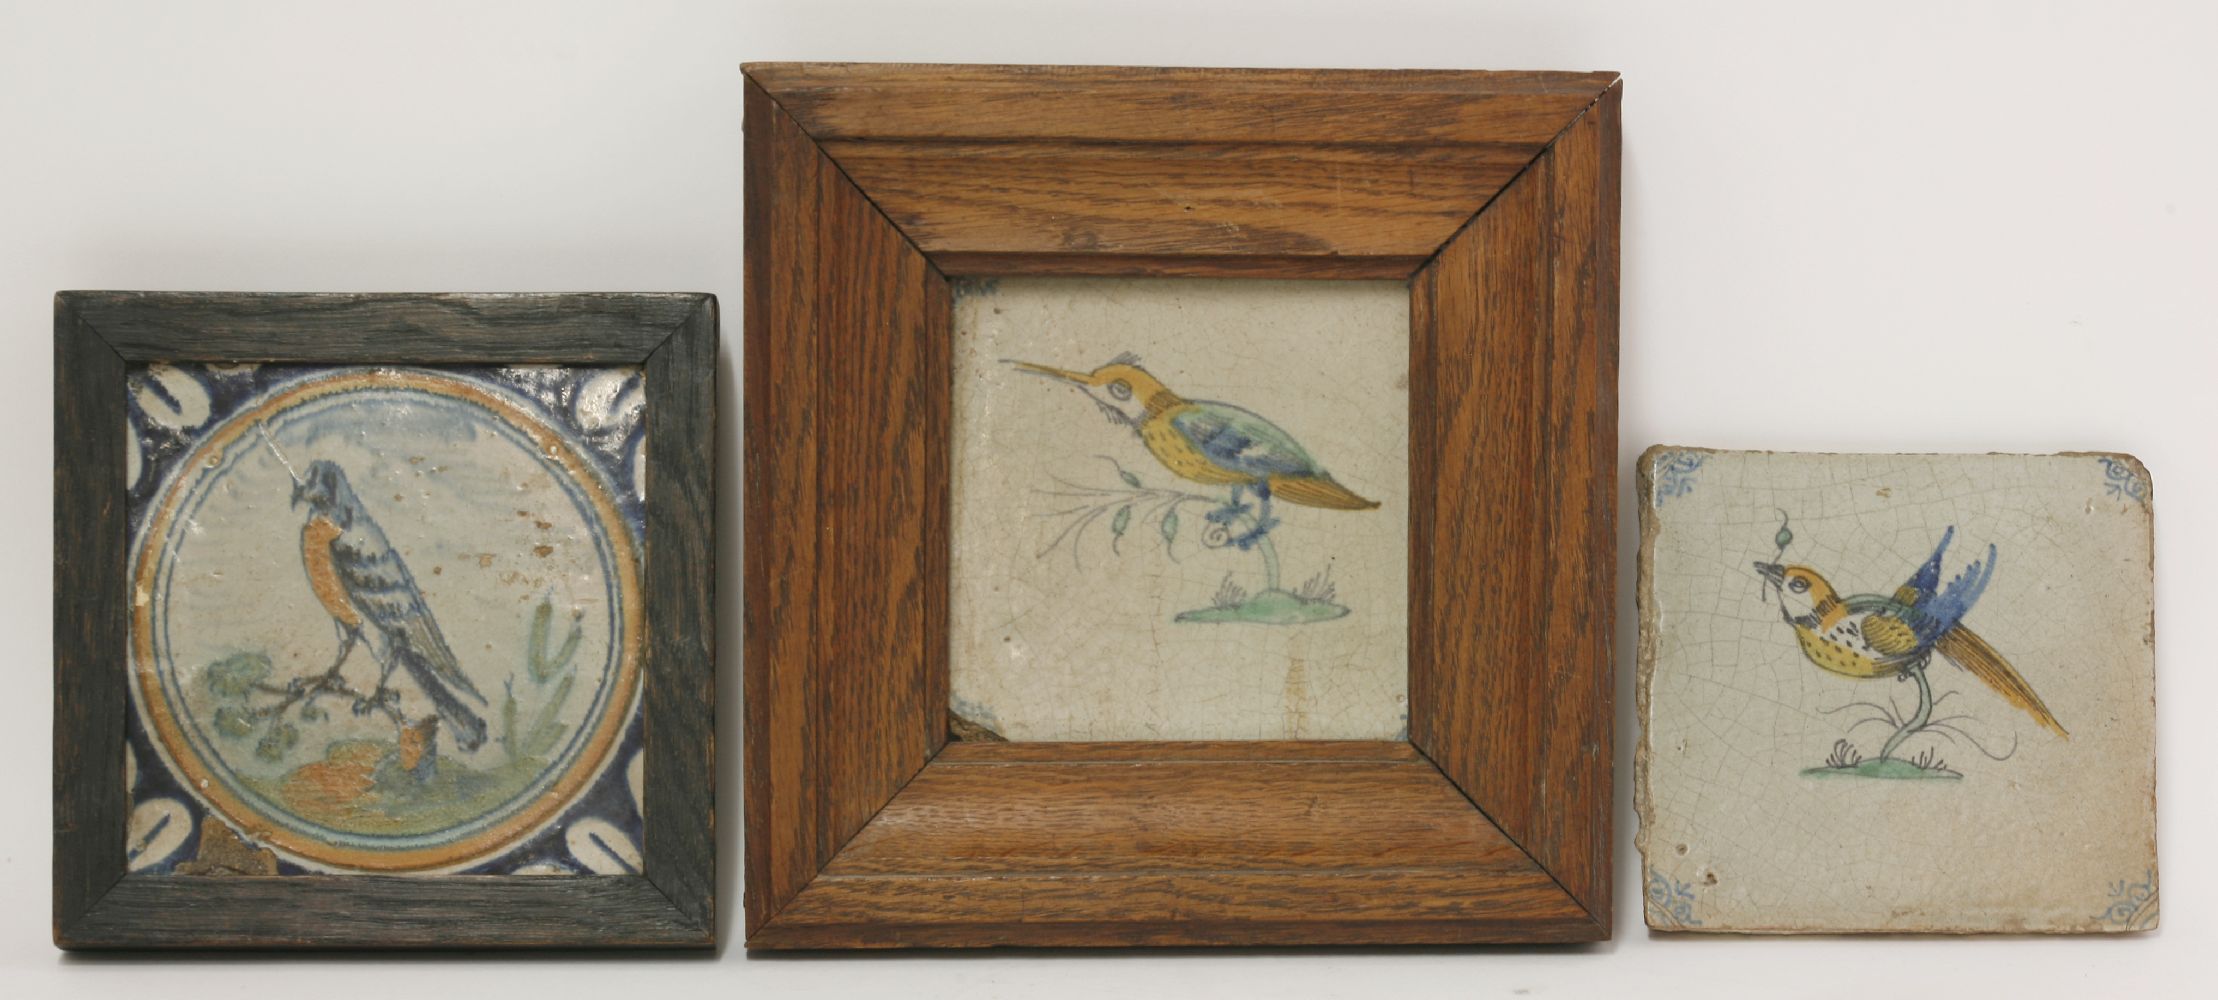 Three various delft Tiles,17th/18th century, each painted with a bird,13cm, framed   (3)